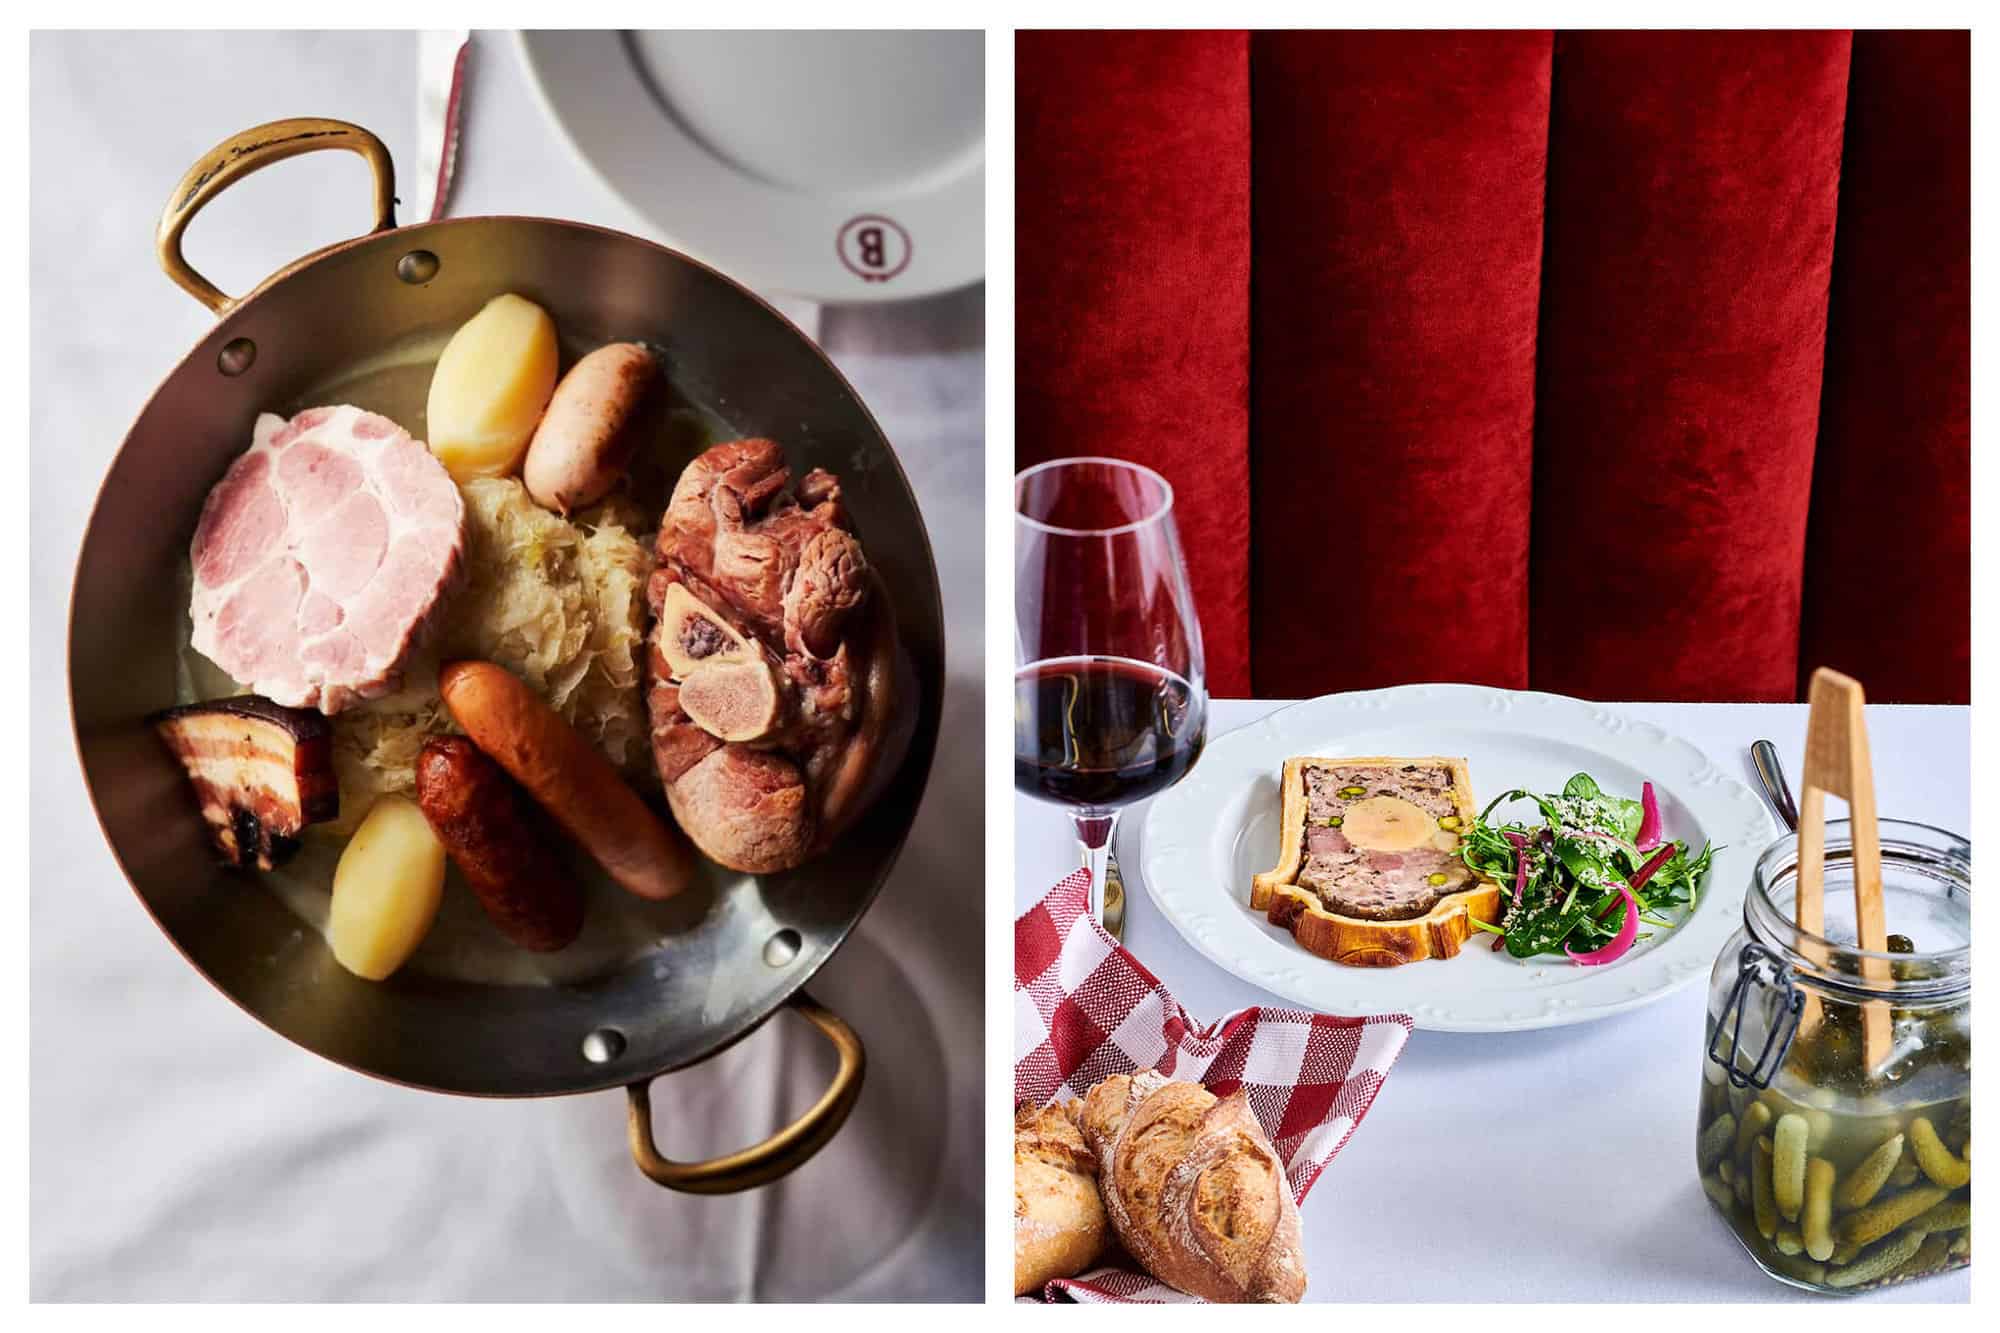 Left: a birds eye view of choucroute at Bofinger restaurant. Right: pâté en croûte with salad, cornichons in a jar, and bread on a table with a glass of red wine at Brasserie Thoumieux.